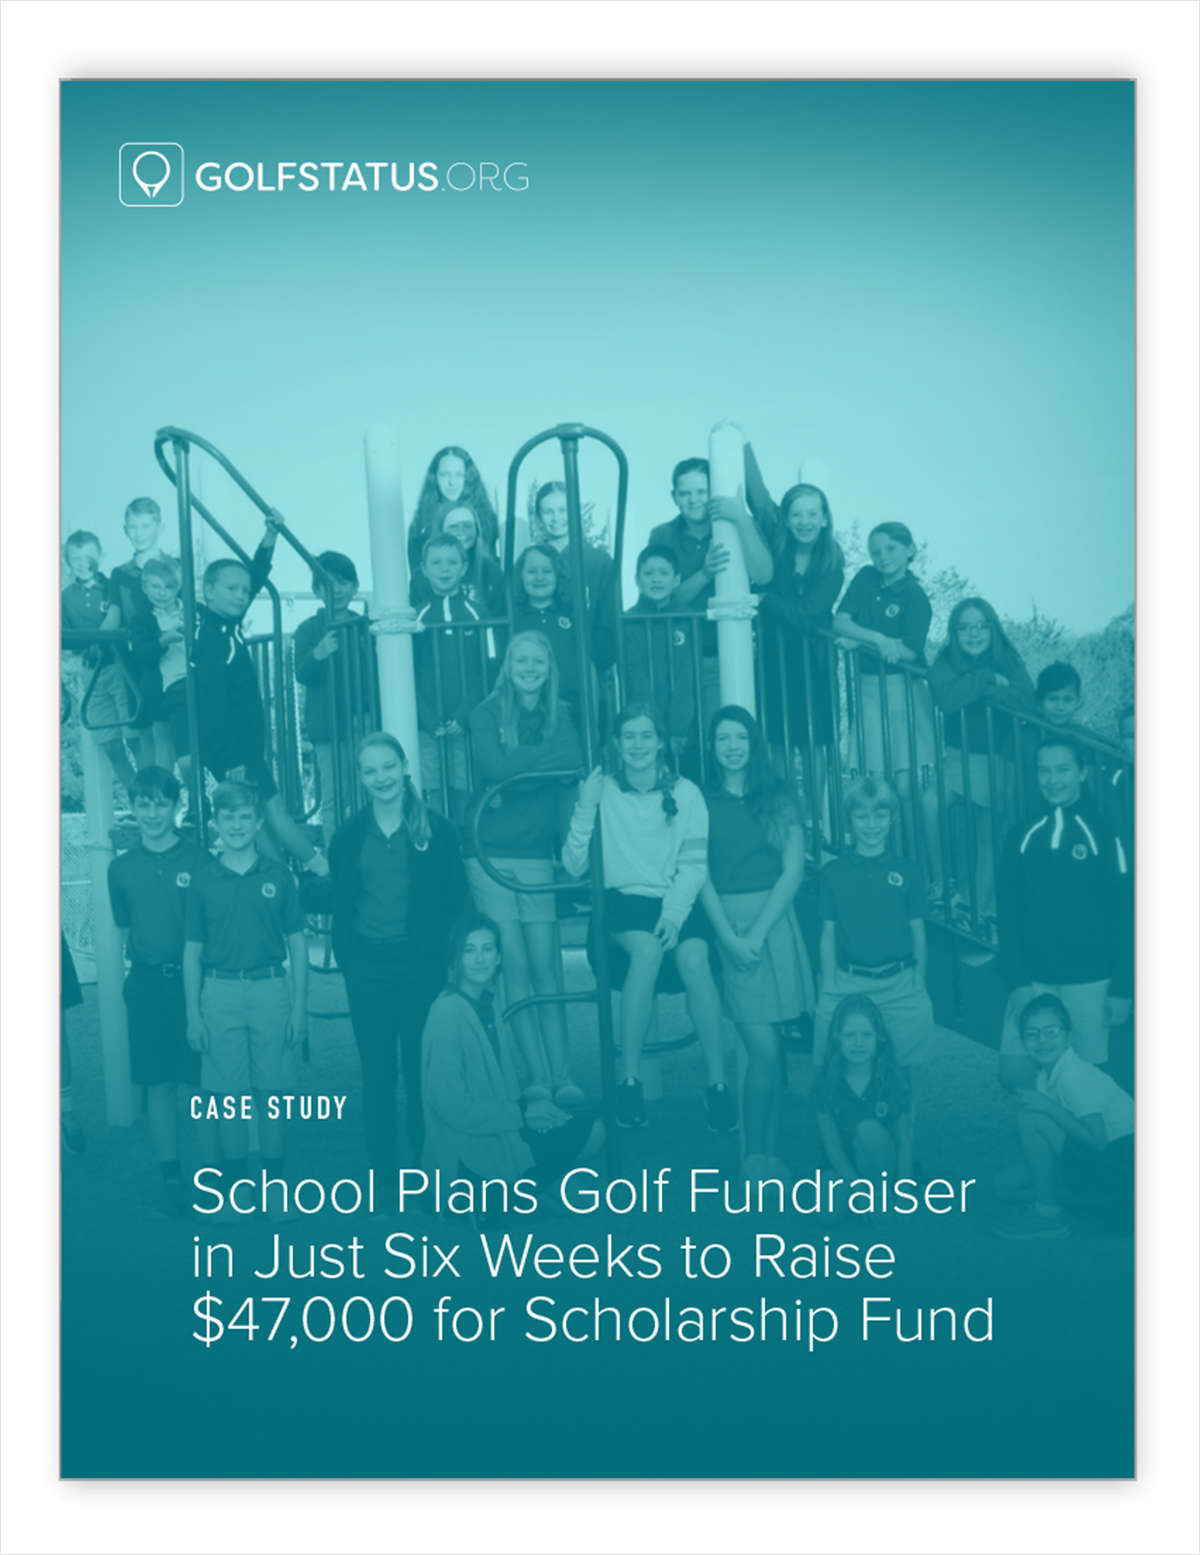 School Plans Golf Fundraiser in Just Six Weeks to Raise $47,000 for Scholarship Fund